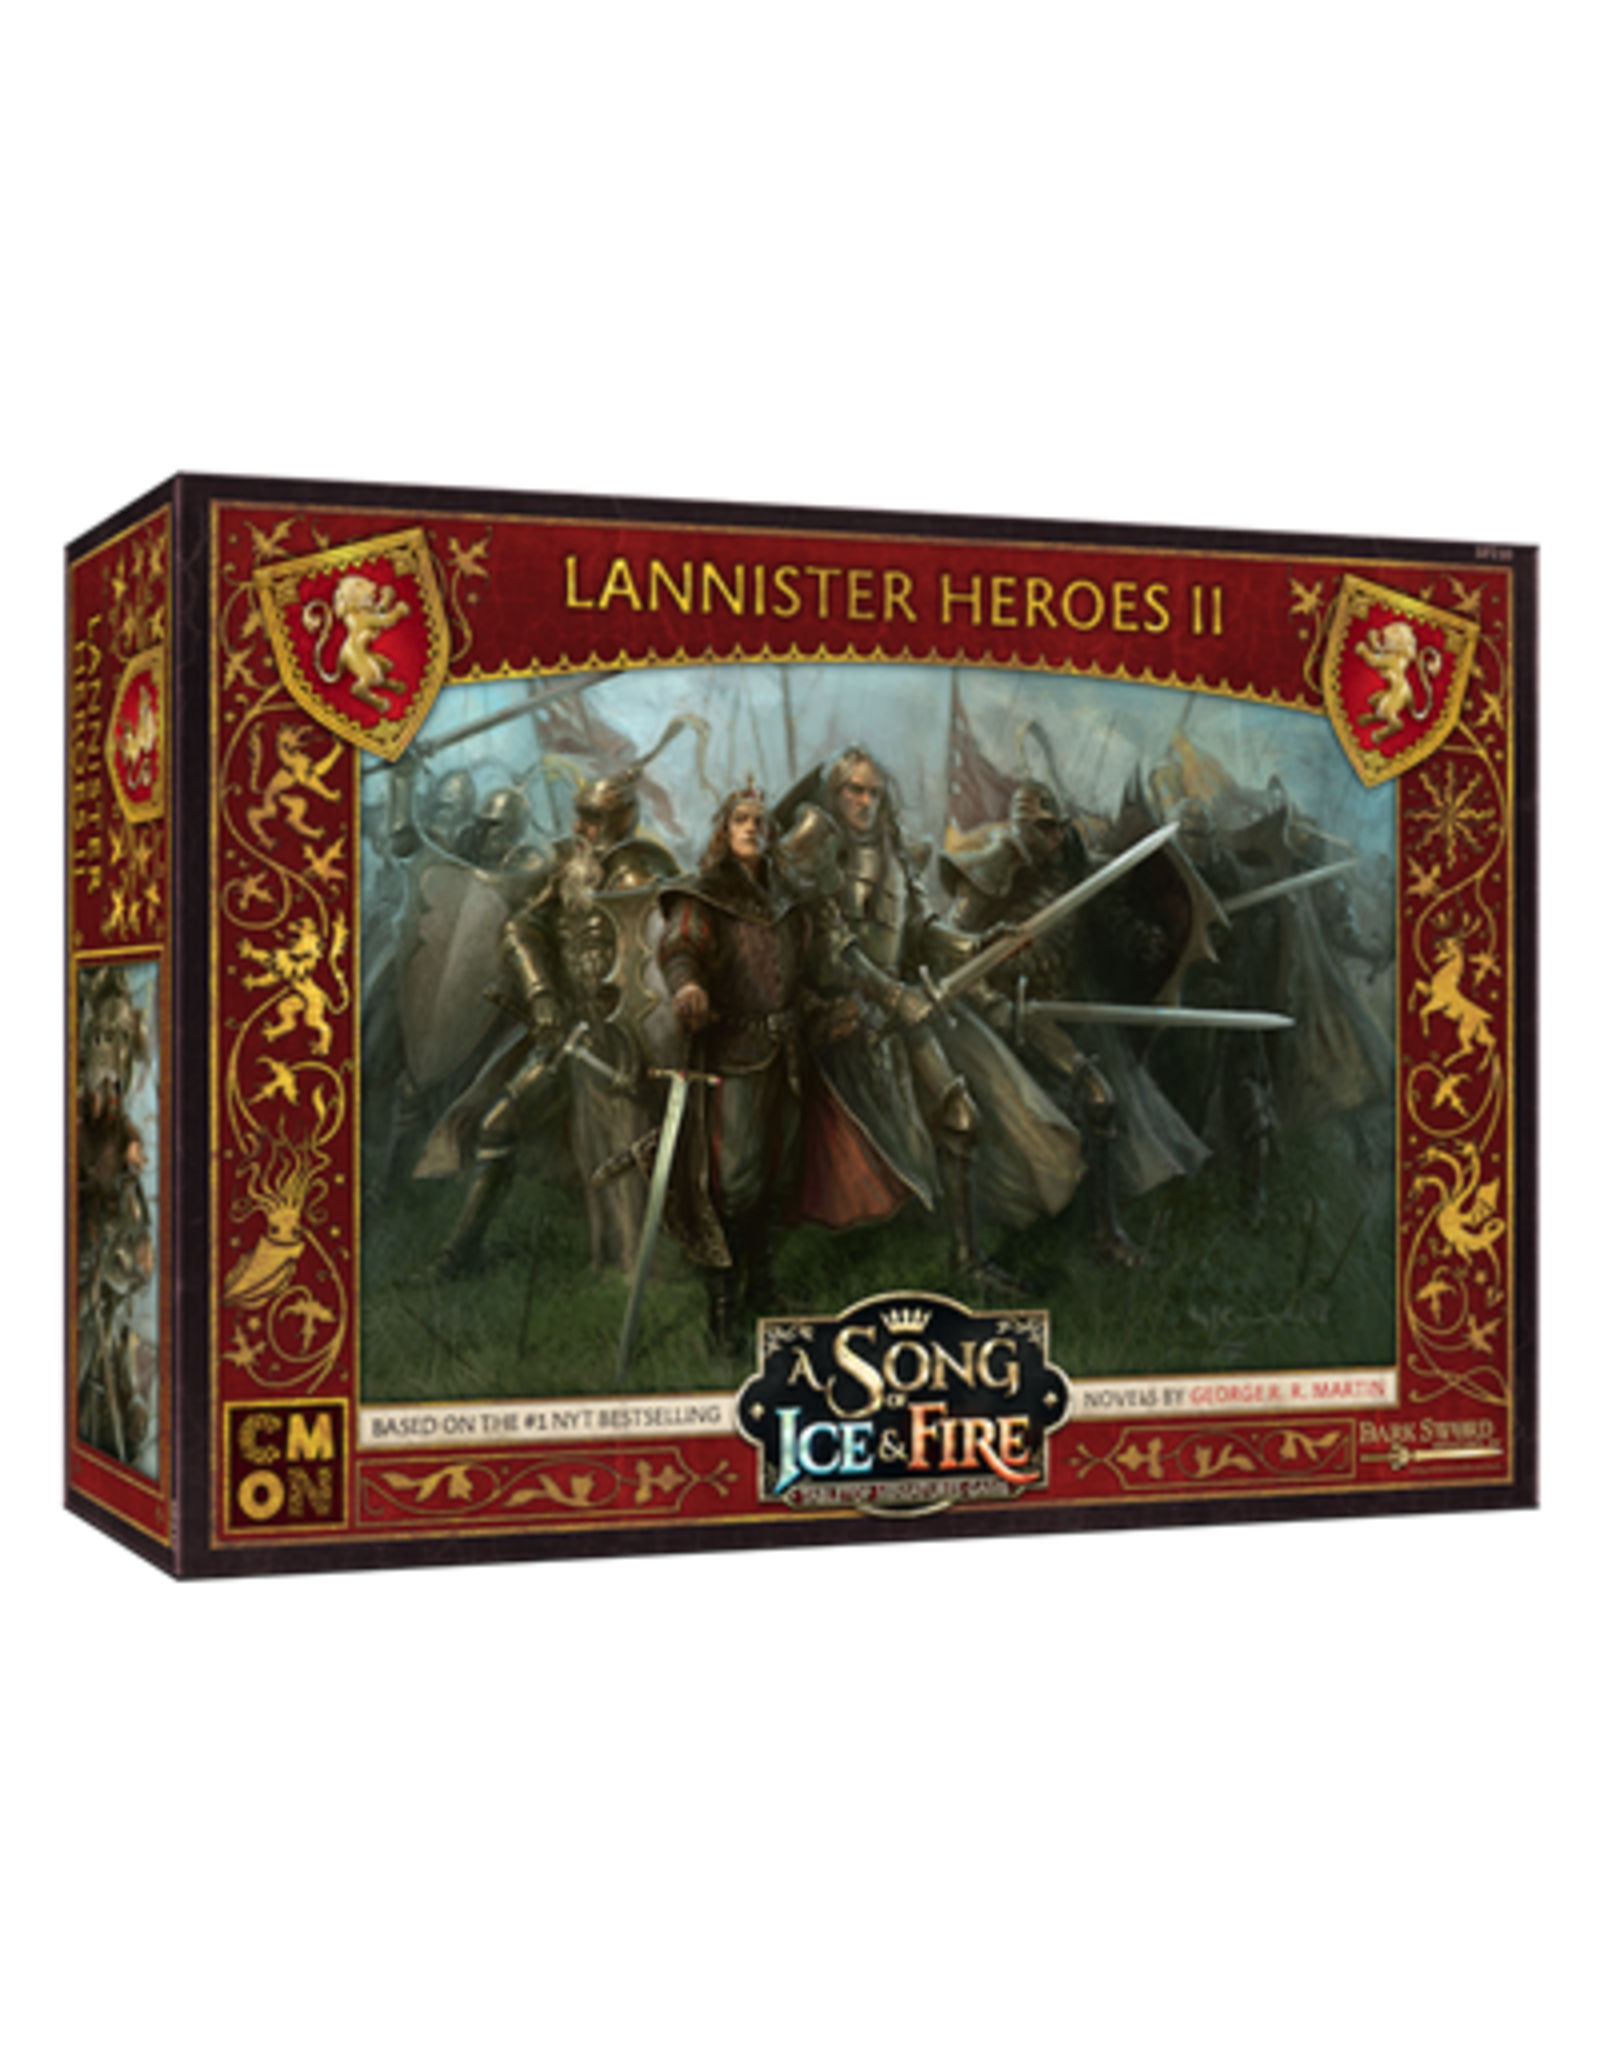 Cool Mini or Not A Song of Ice & Fire Tabletop Miniatures Game: Lannister Heroes #2